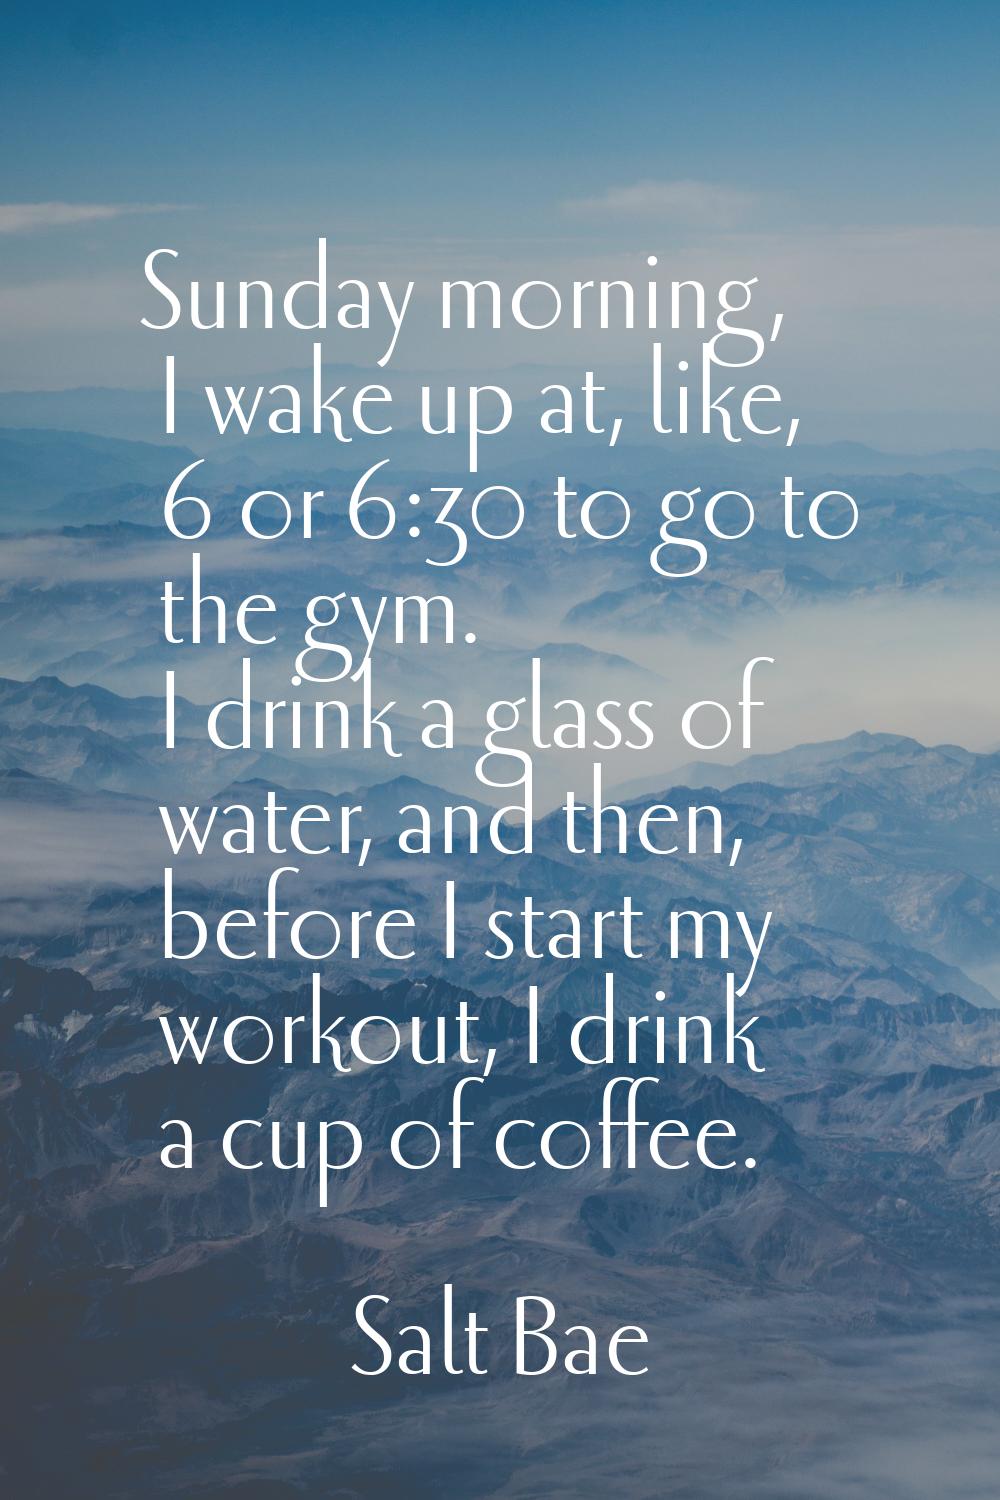 Sunday morning, I wake up at, like, 6 or 6:30 to go to the gym. I drink a glass of water, and then,